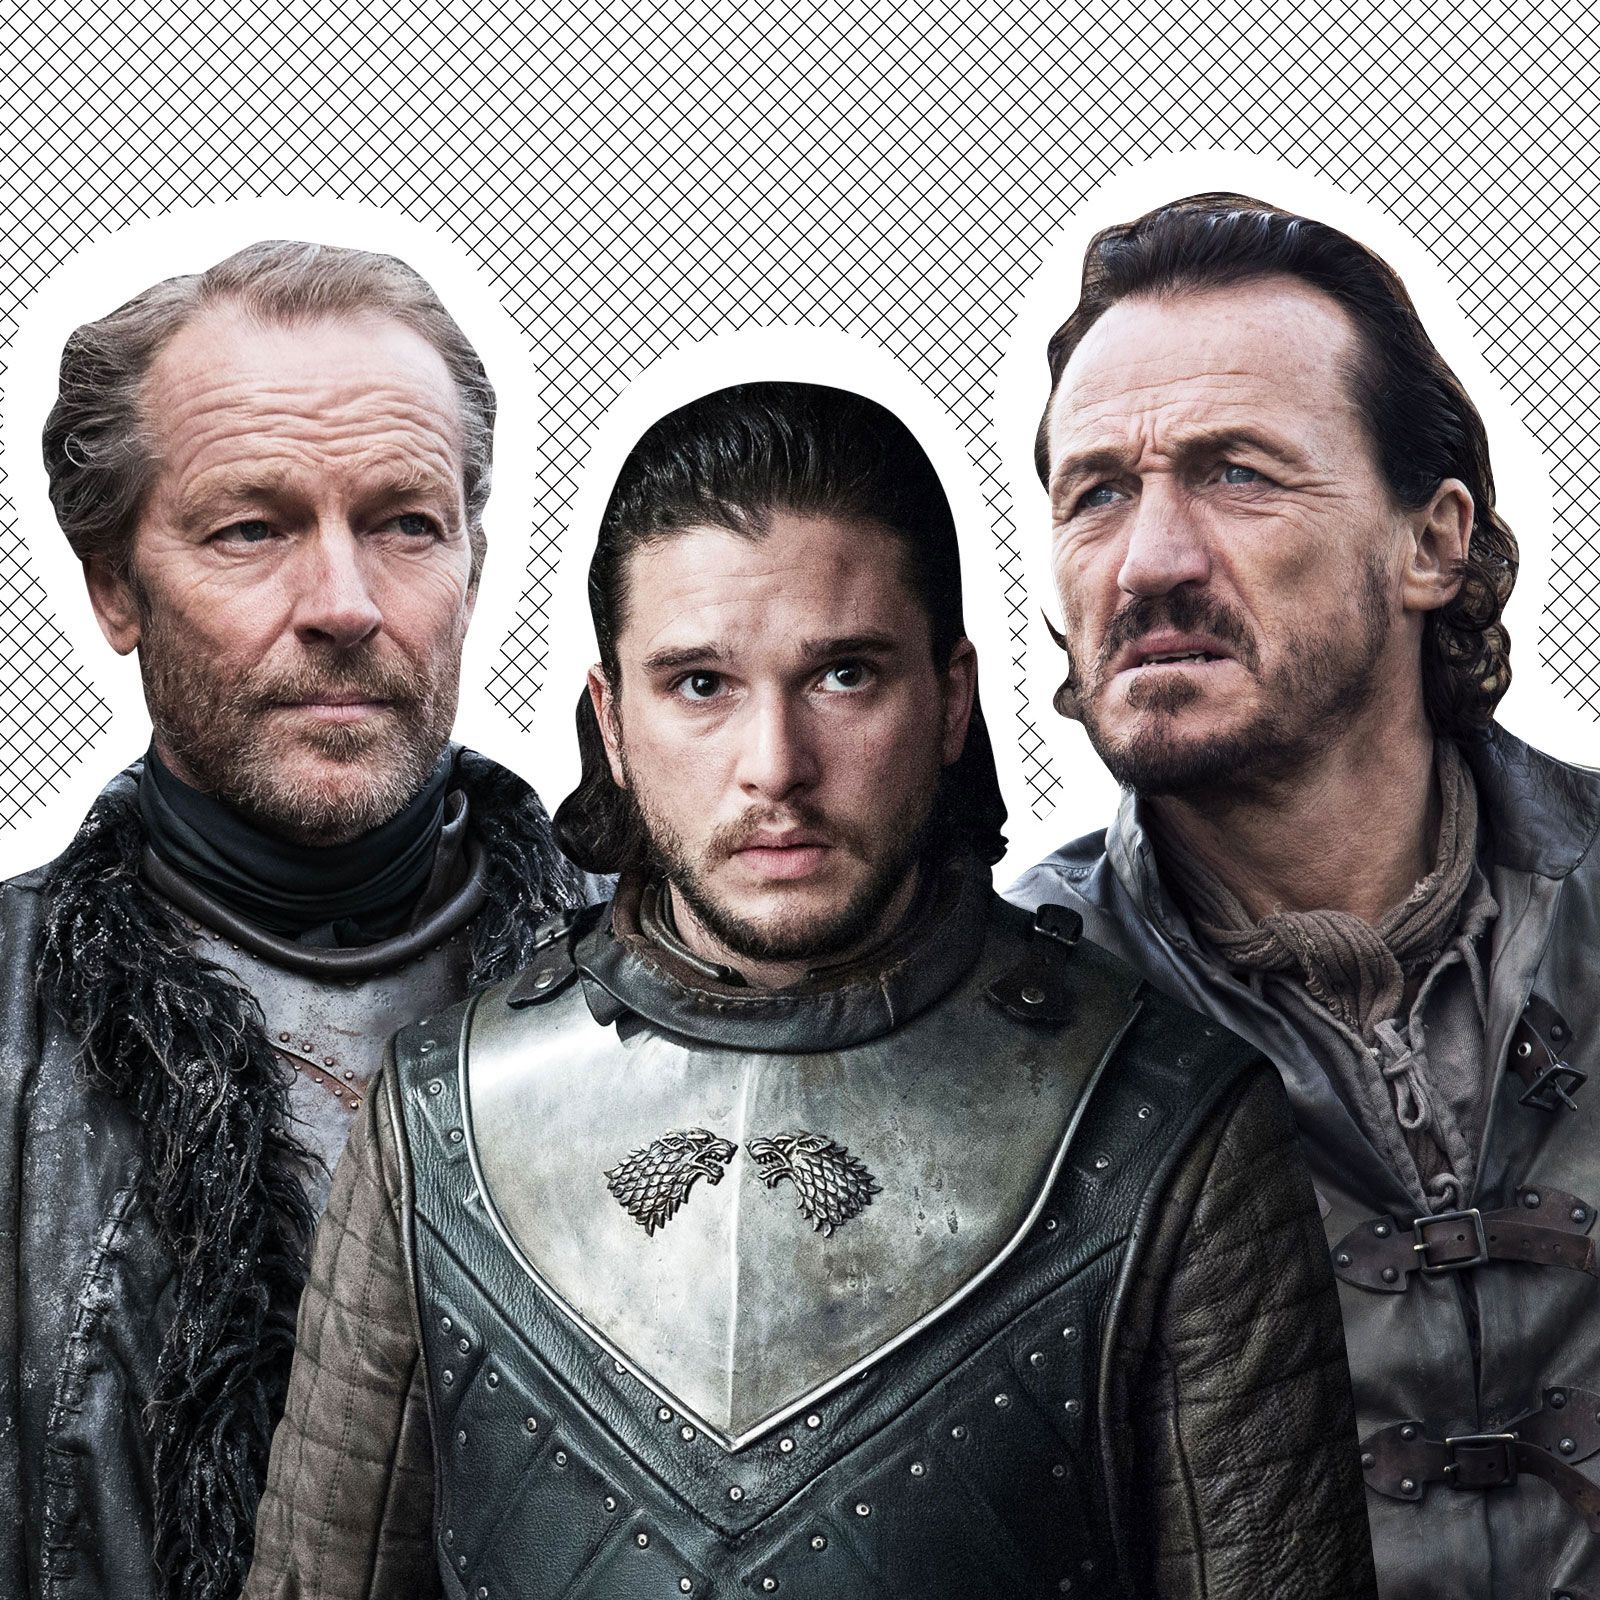 How to Tell 'Game of Thrones' Male Cast Members Apart